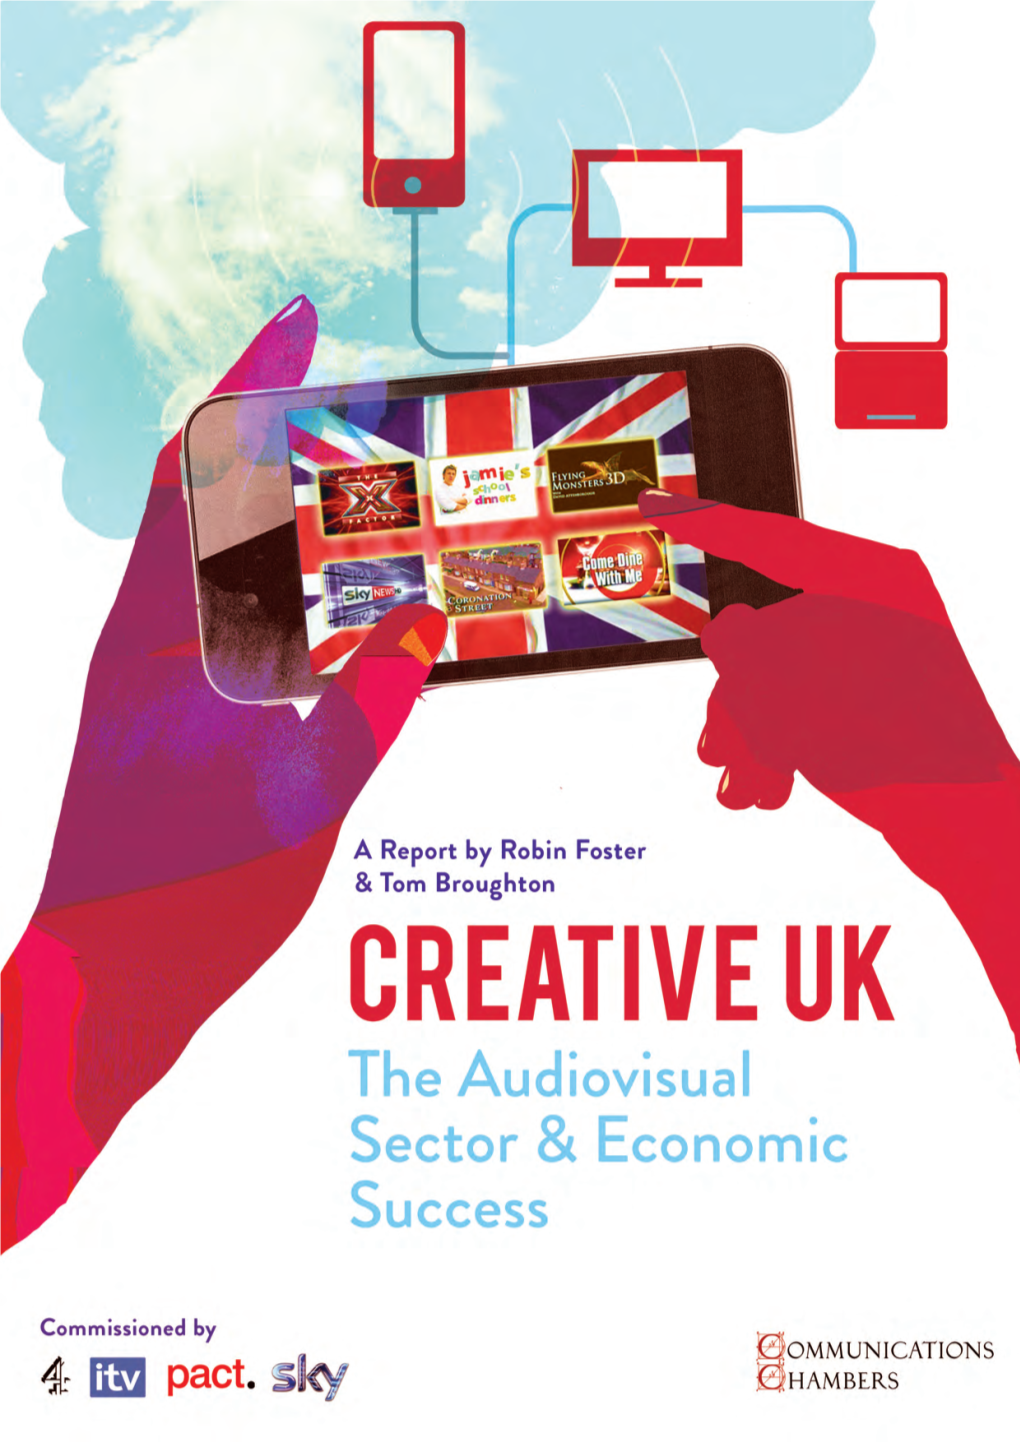 Creative UK 2011 Covers:Xxx Creativeuk2011 13/4/11 16:50 Page 3 Creative UK 2011 Covers:Xxx Creativeuk2011 13/4/11 16:50 Page 4